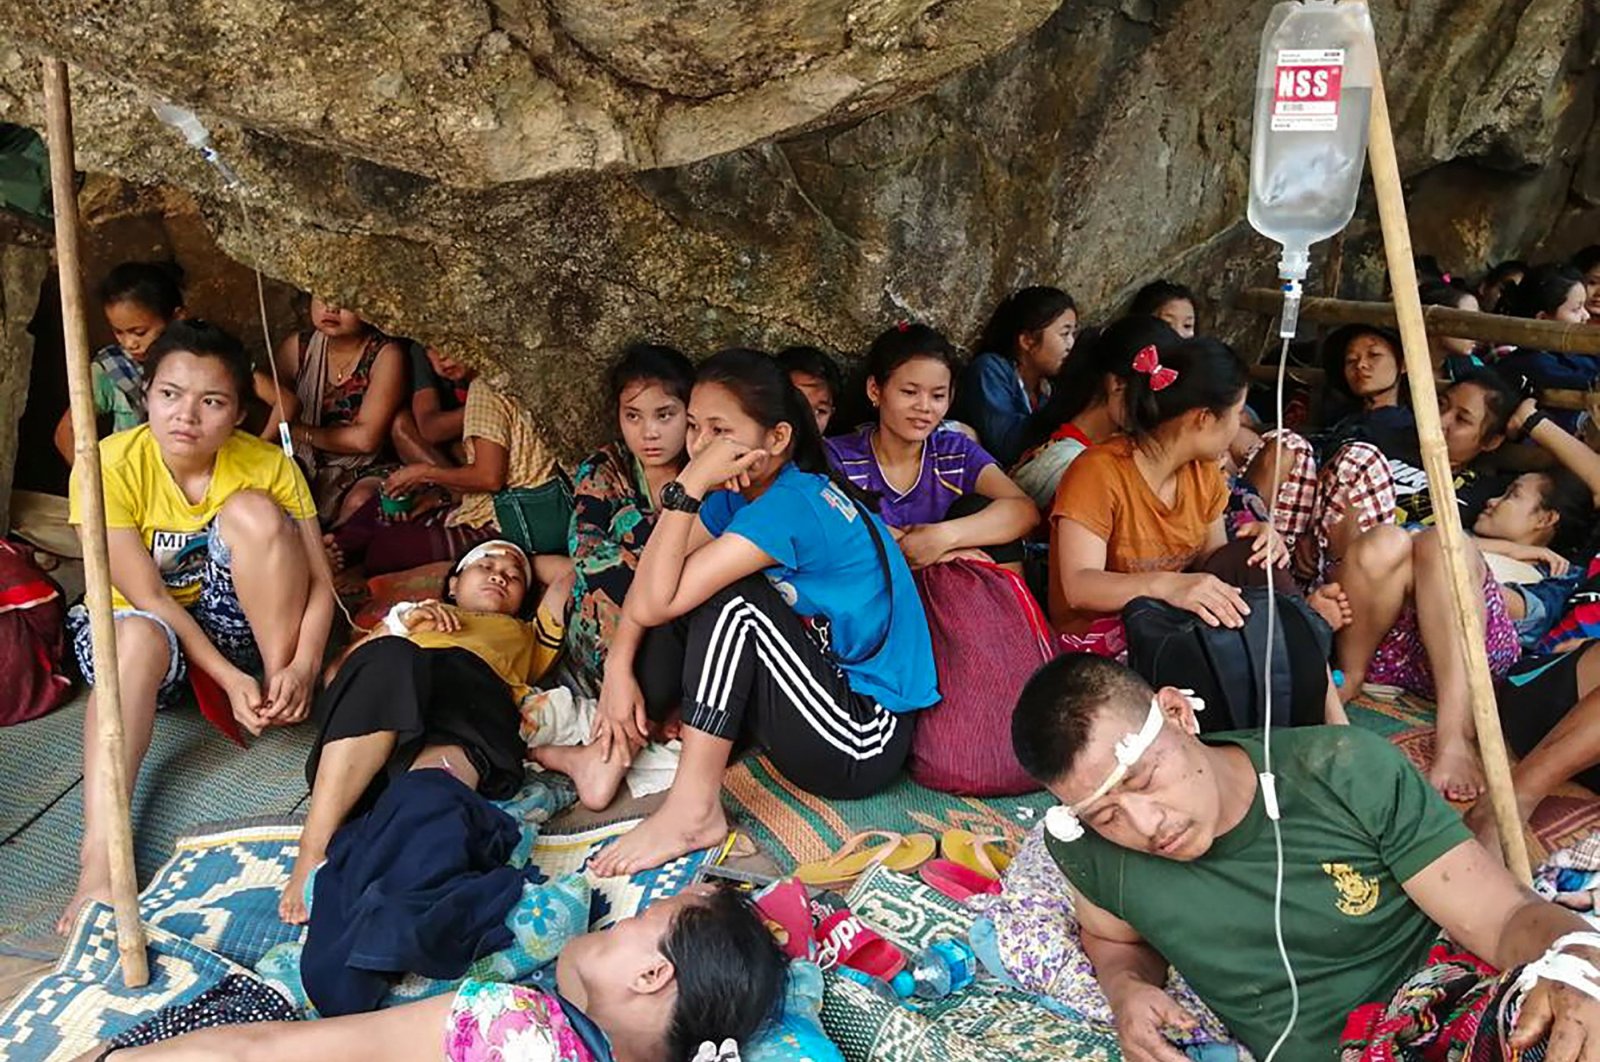 Karen villagers, injured during airstrikes in the area following the February military coup, rest after receiving medical treatment while taking shelter in a jungle near Day Pu No in Hpa-pun in eastern Karen state, Myanmar, March 30, 2021. (Free Burma Rangers via AFP)